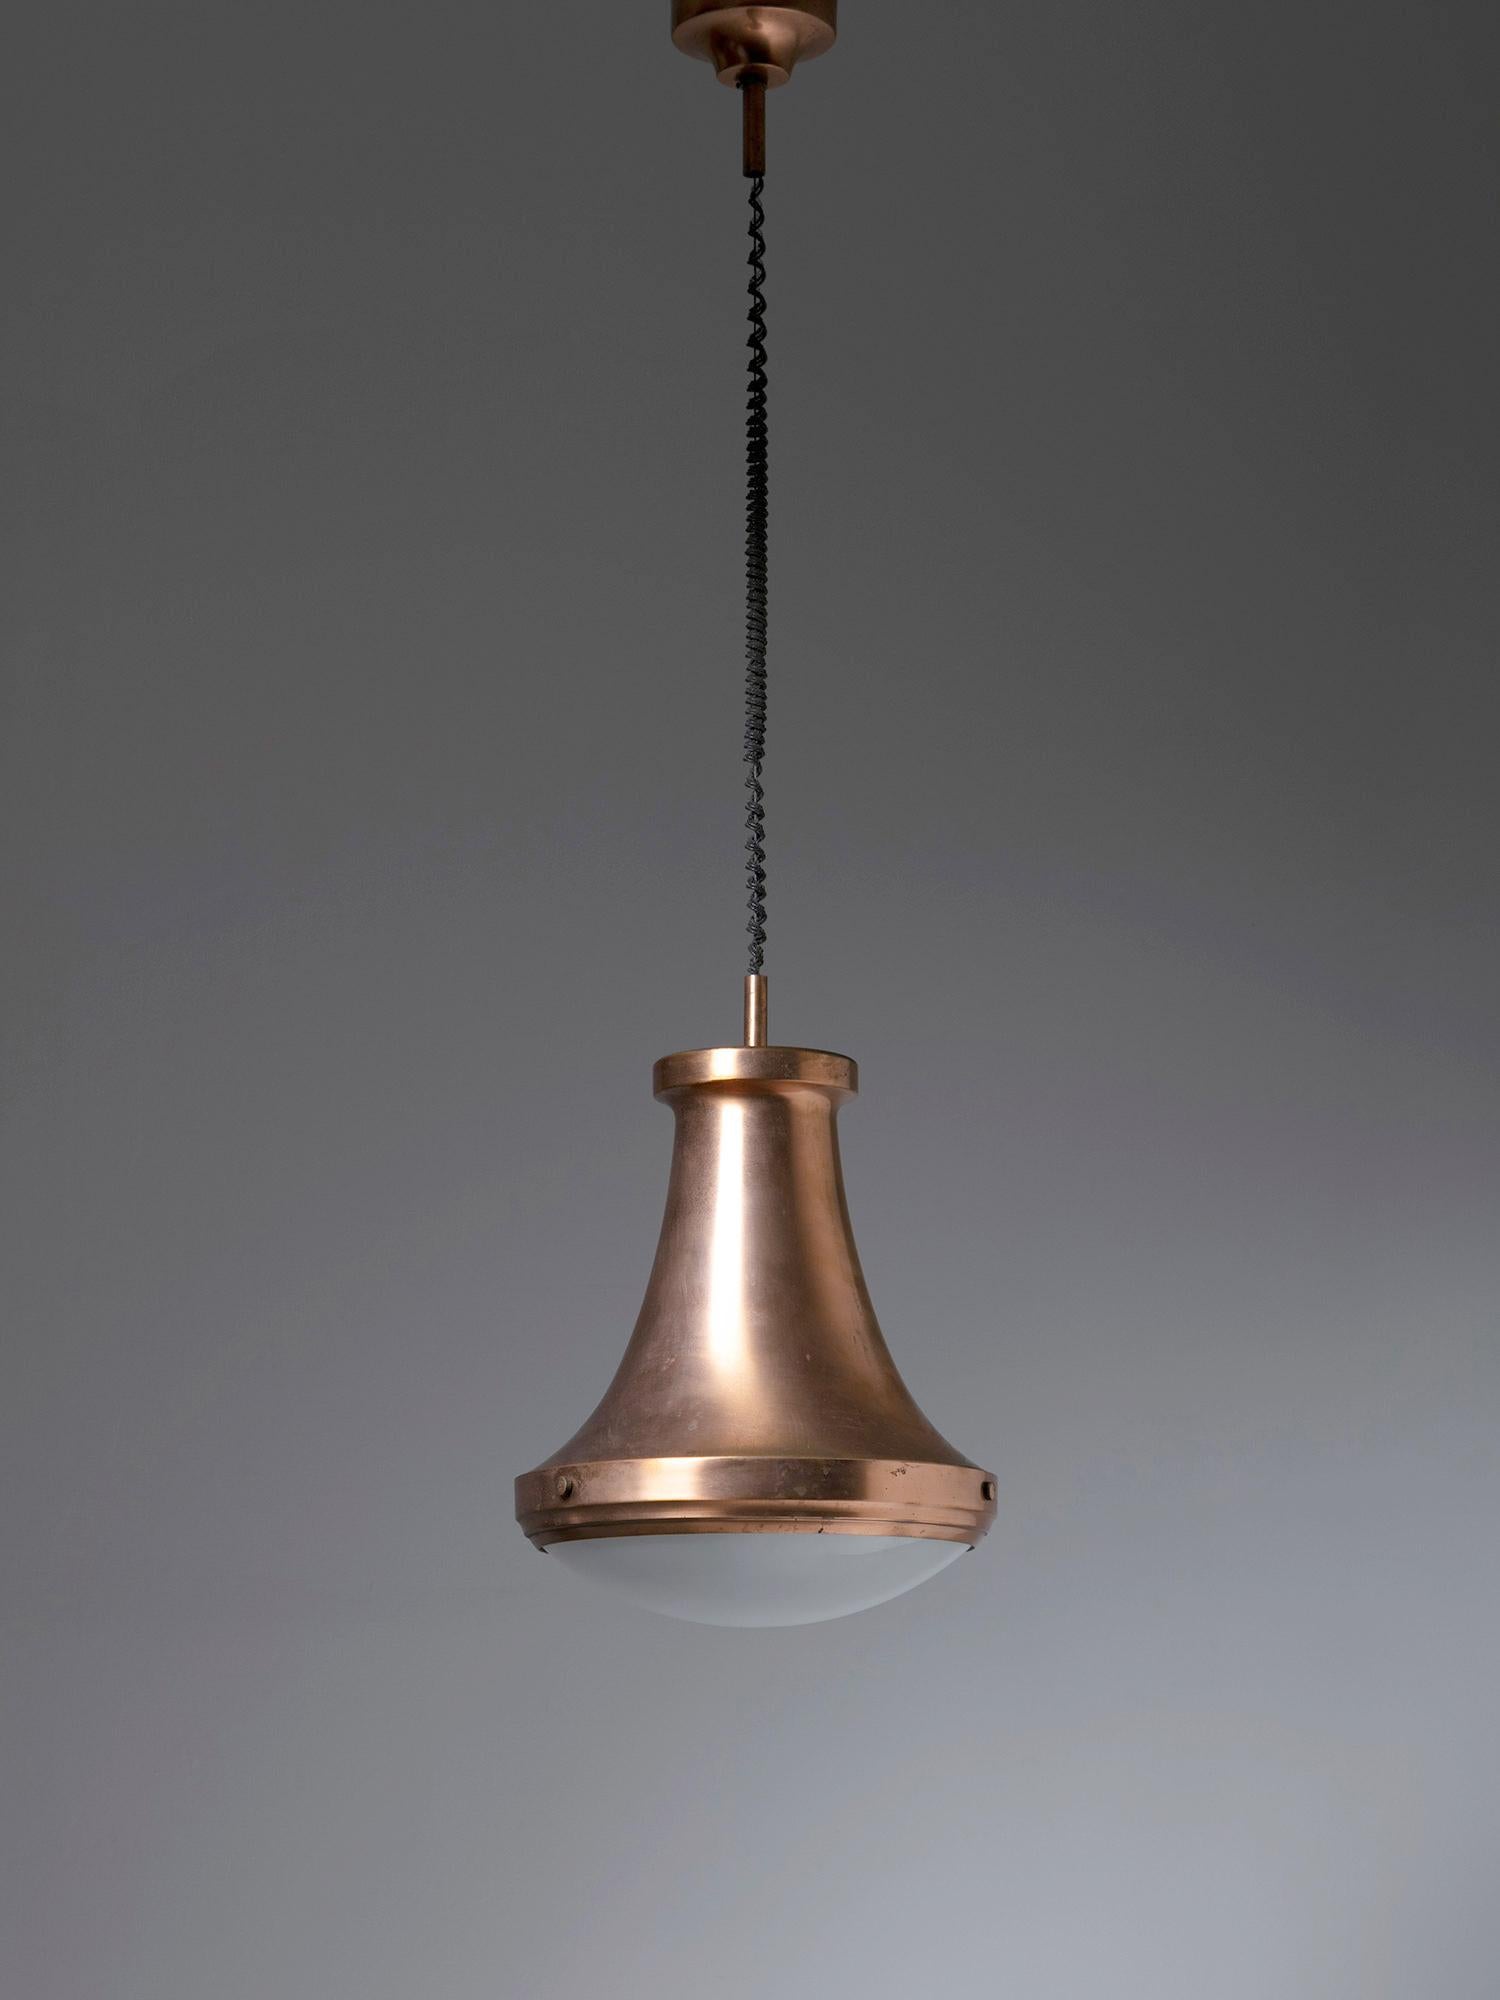 Italian Copper Pendant Lamp with Large Metal Body, Frosted Glass Shade, Italy, 1960s For Sale